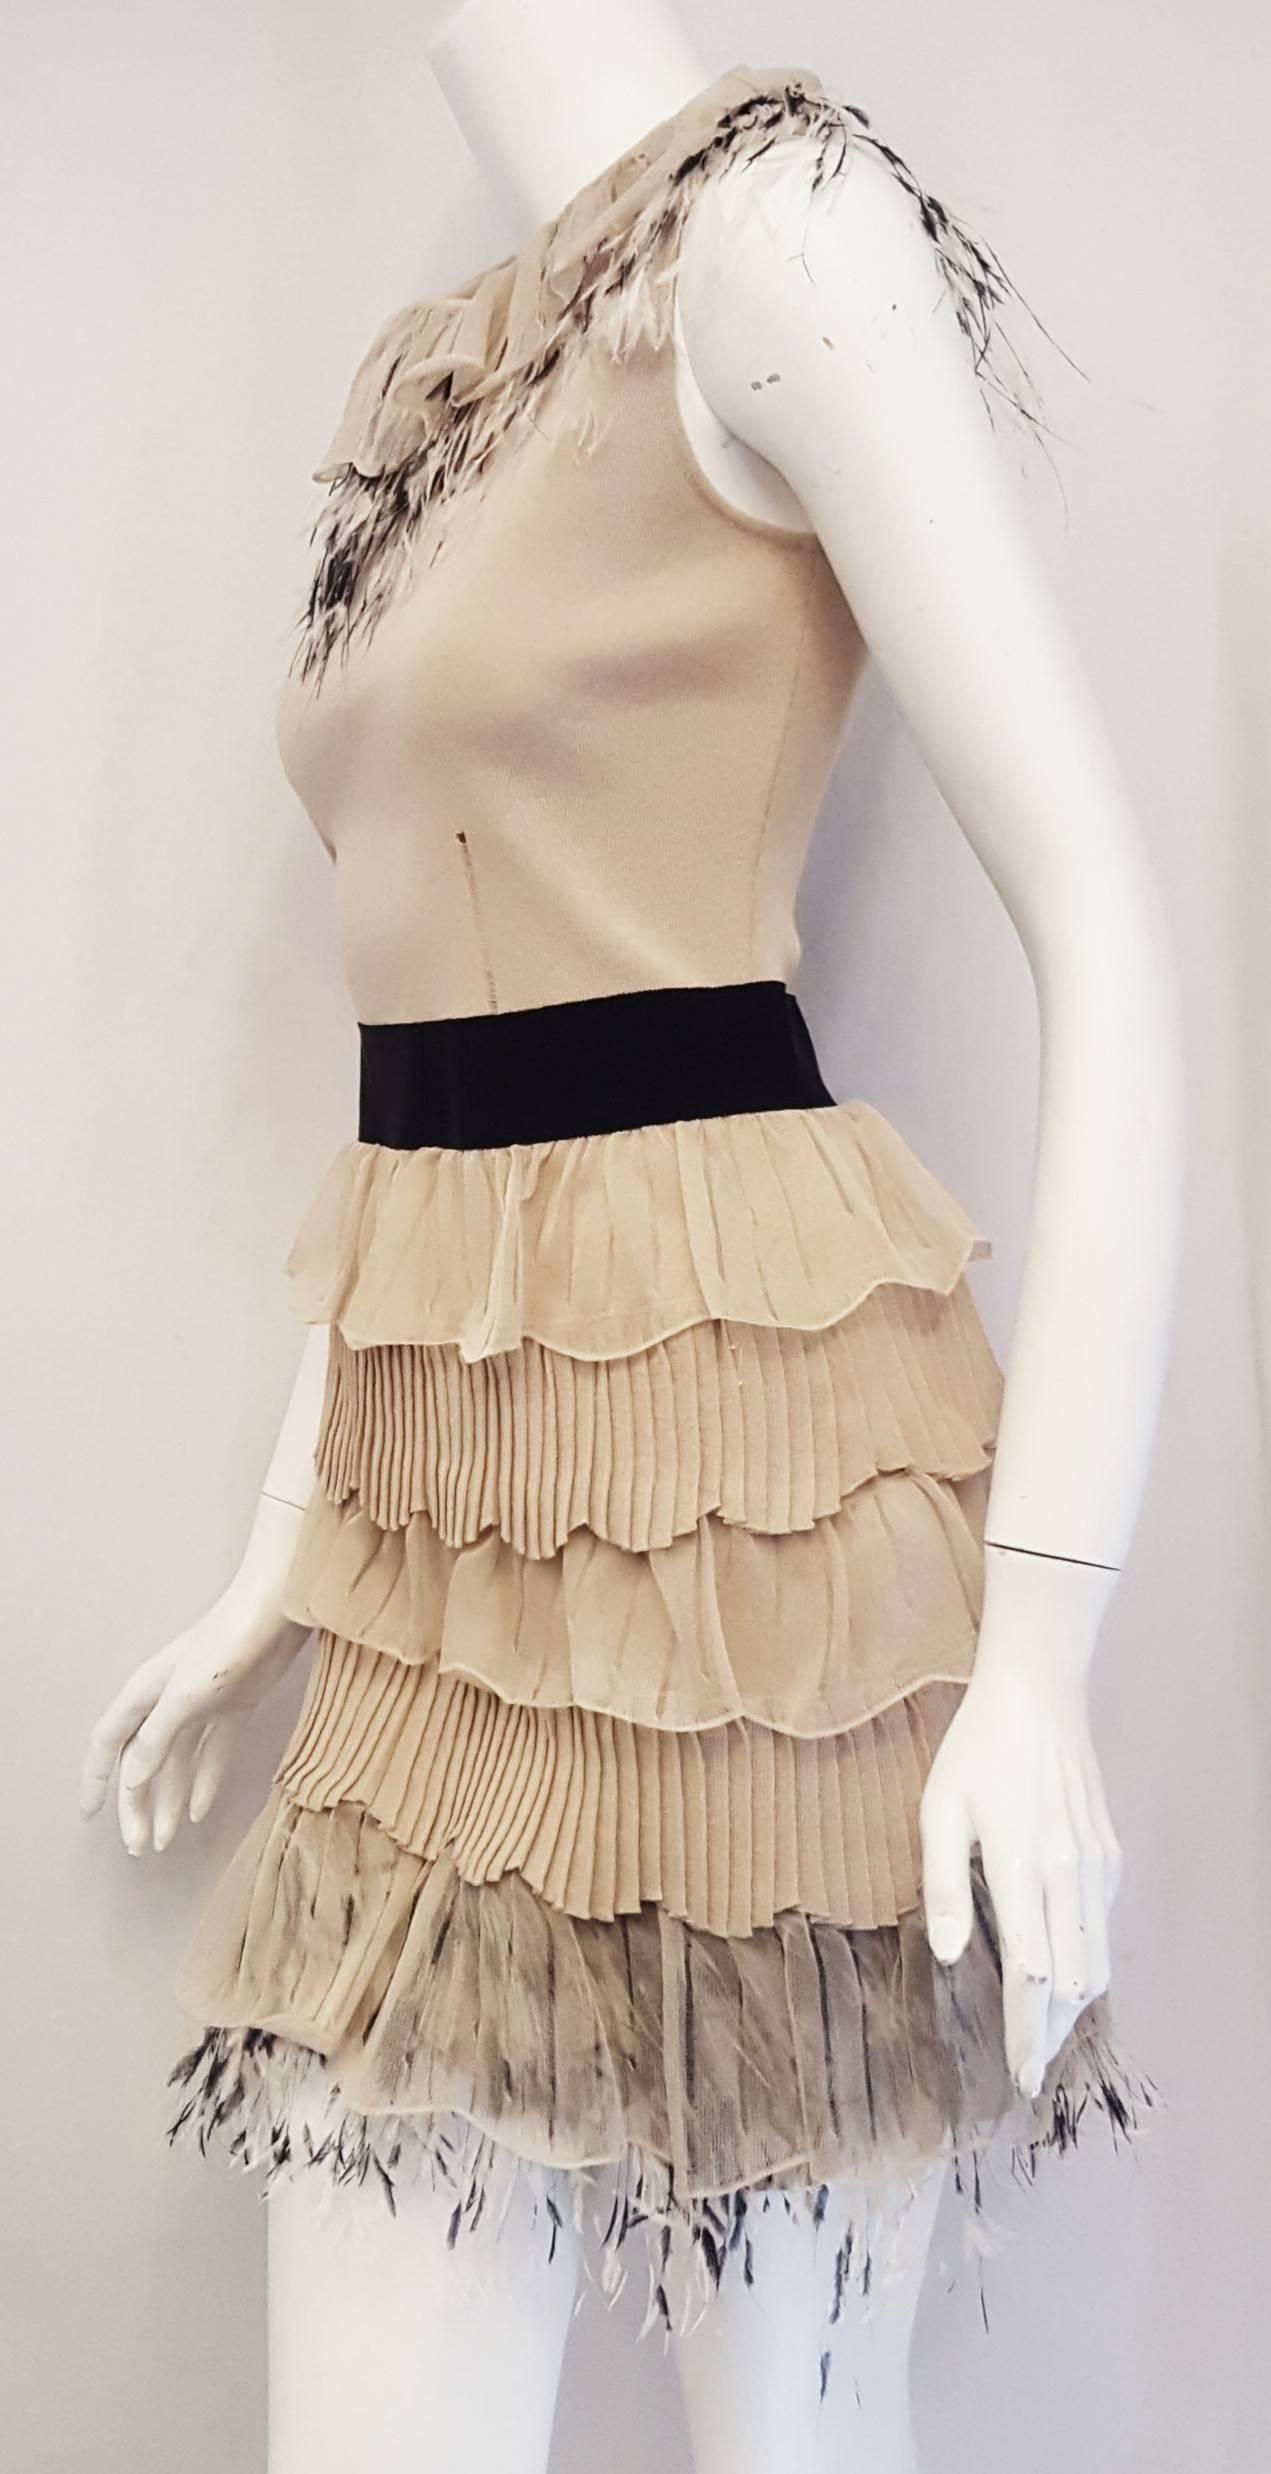 Valentino beige sleeveless knit dress with ruffle collar and Ostrich feathers decorations is accentuated waist with a black grosgrain ribbon.  For the bottom of the dress alternating ruffle layers of beige silk with pleated knit ruffles down to the